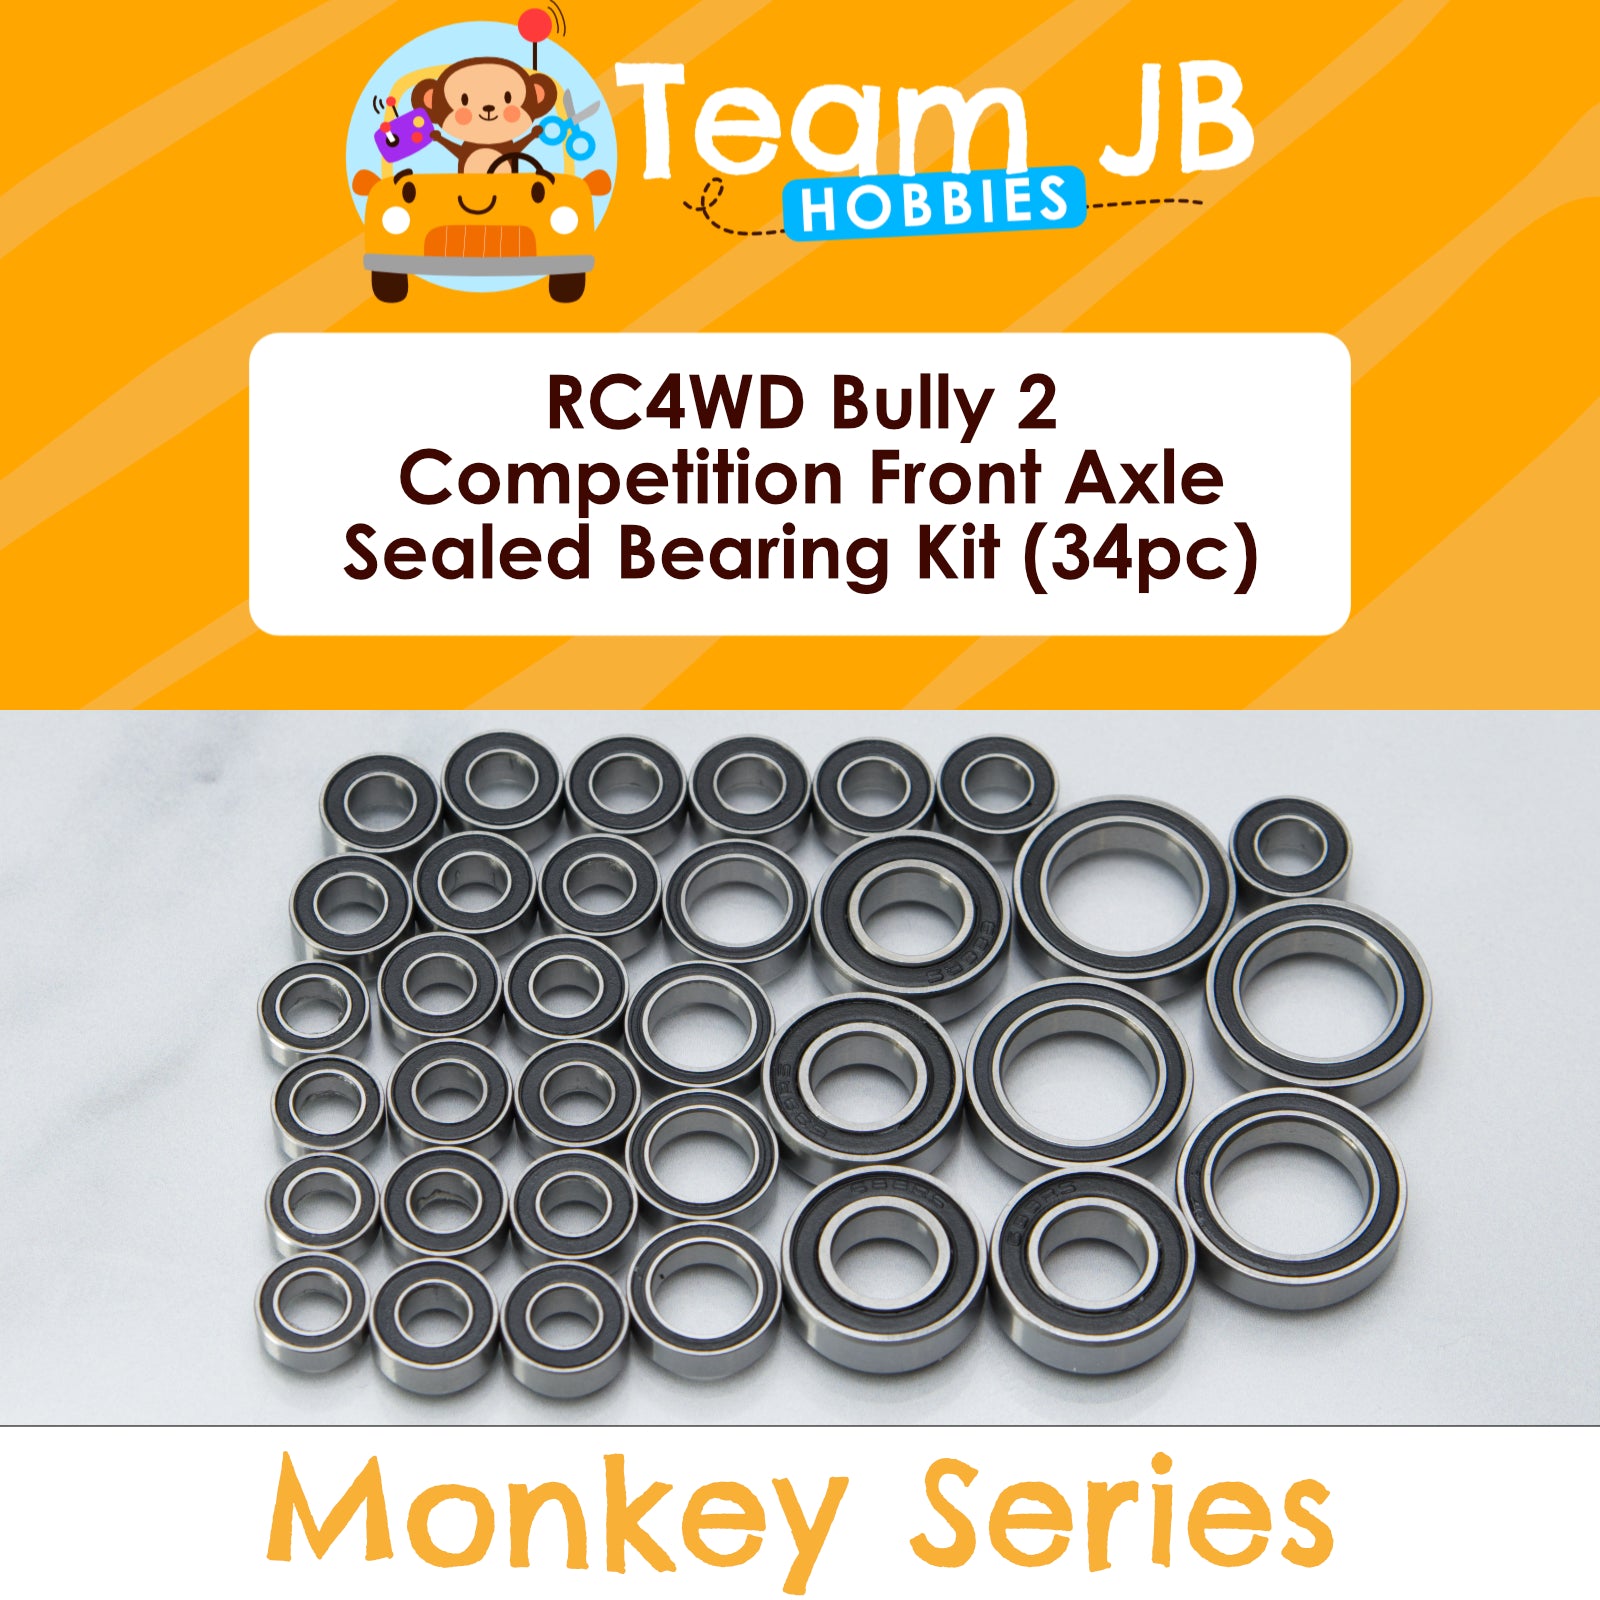 RC4WD Bully 2 Competition Front Axle - Sealed Bearing Kit